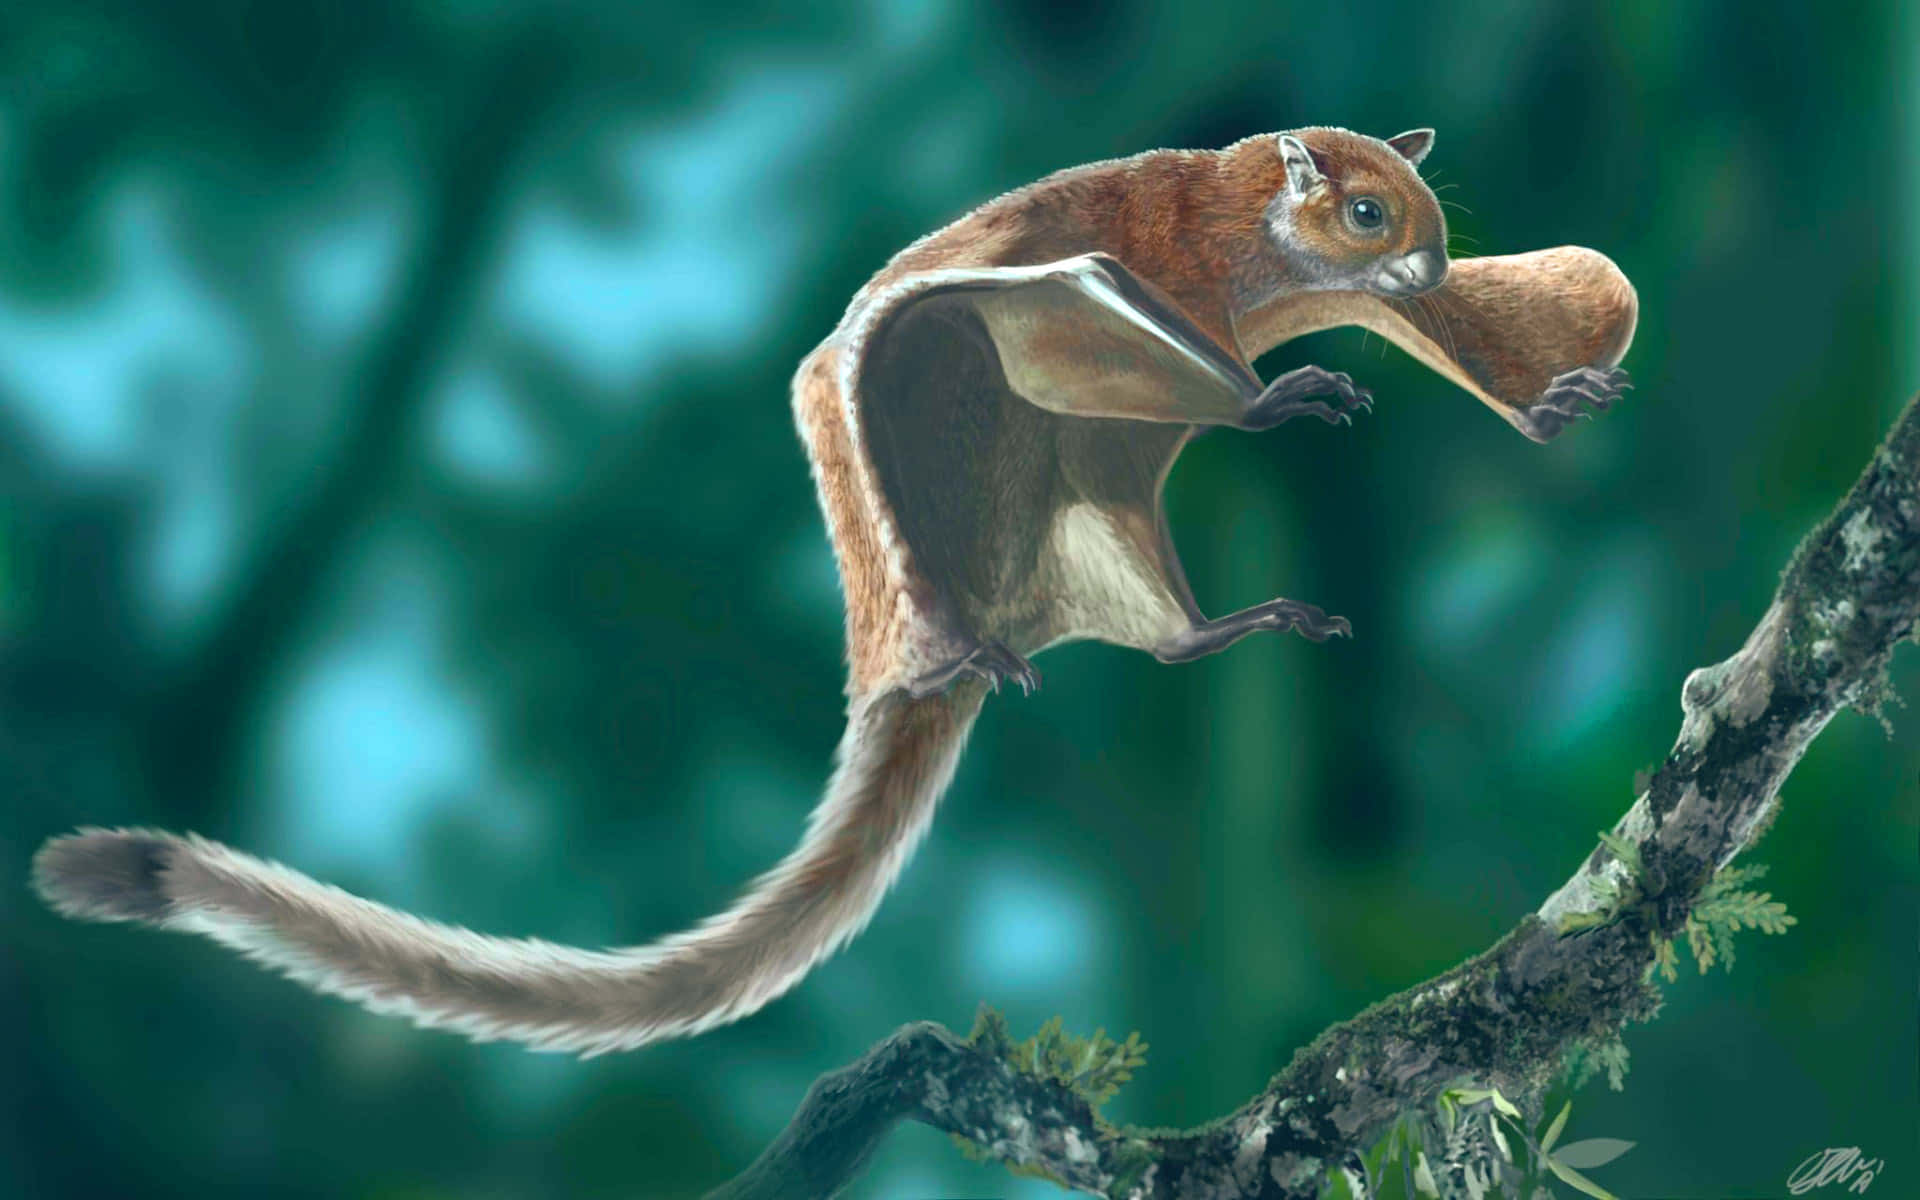 Flying Squirrel Soaring Through the Trees